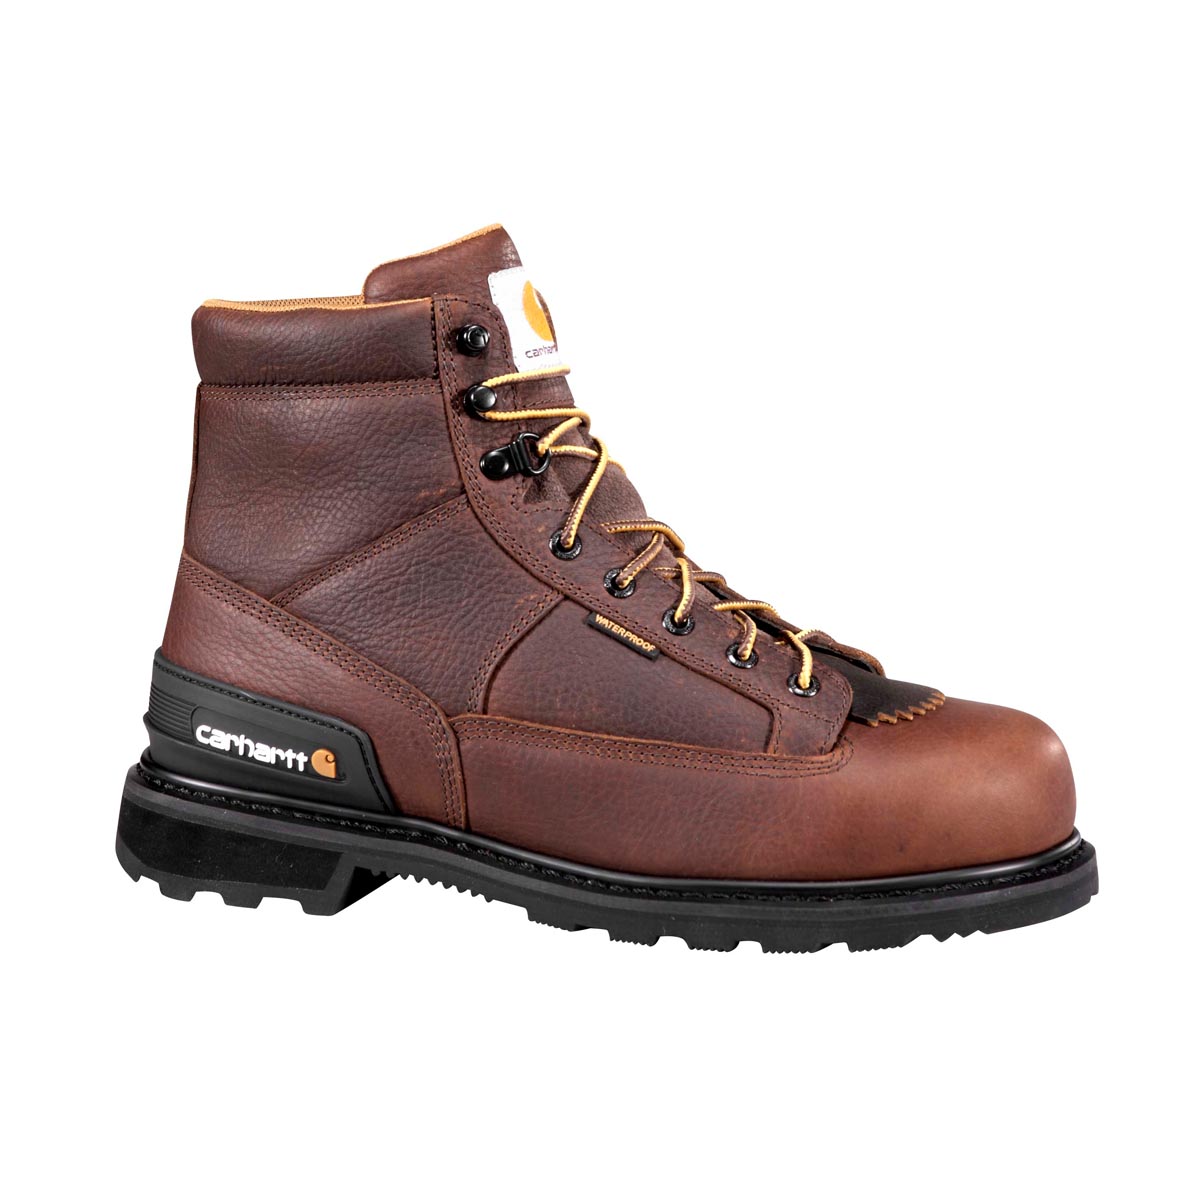 Carhartt Mens 6 Inch Lace to Toe Steel Toe